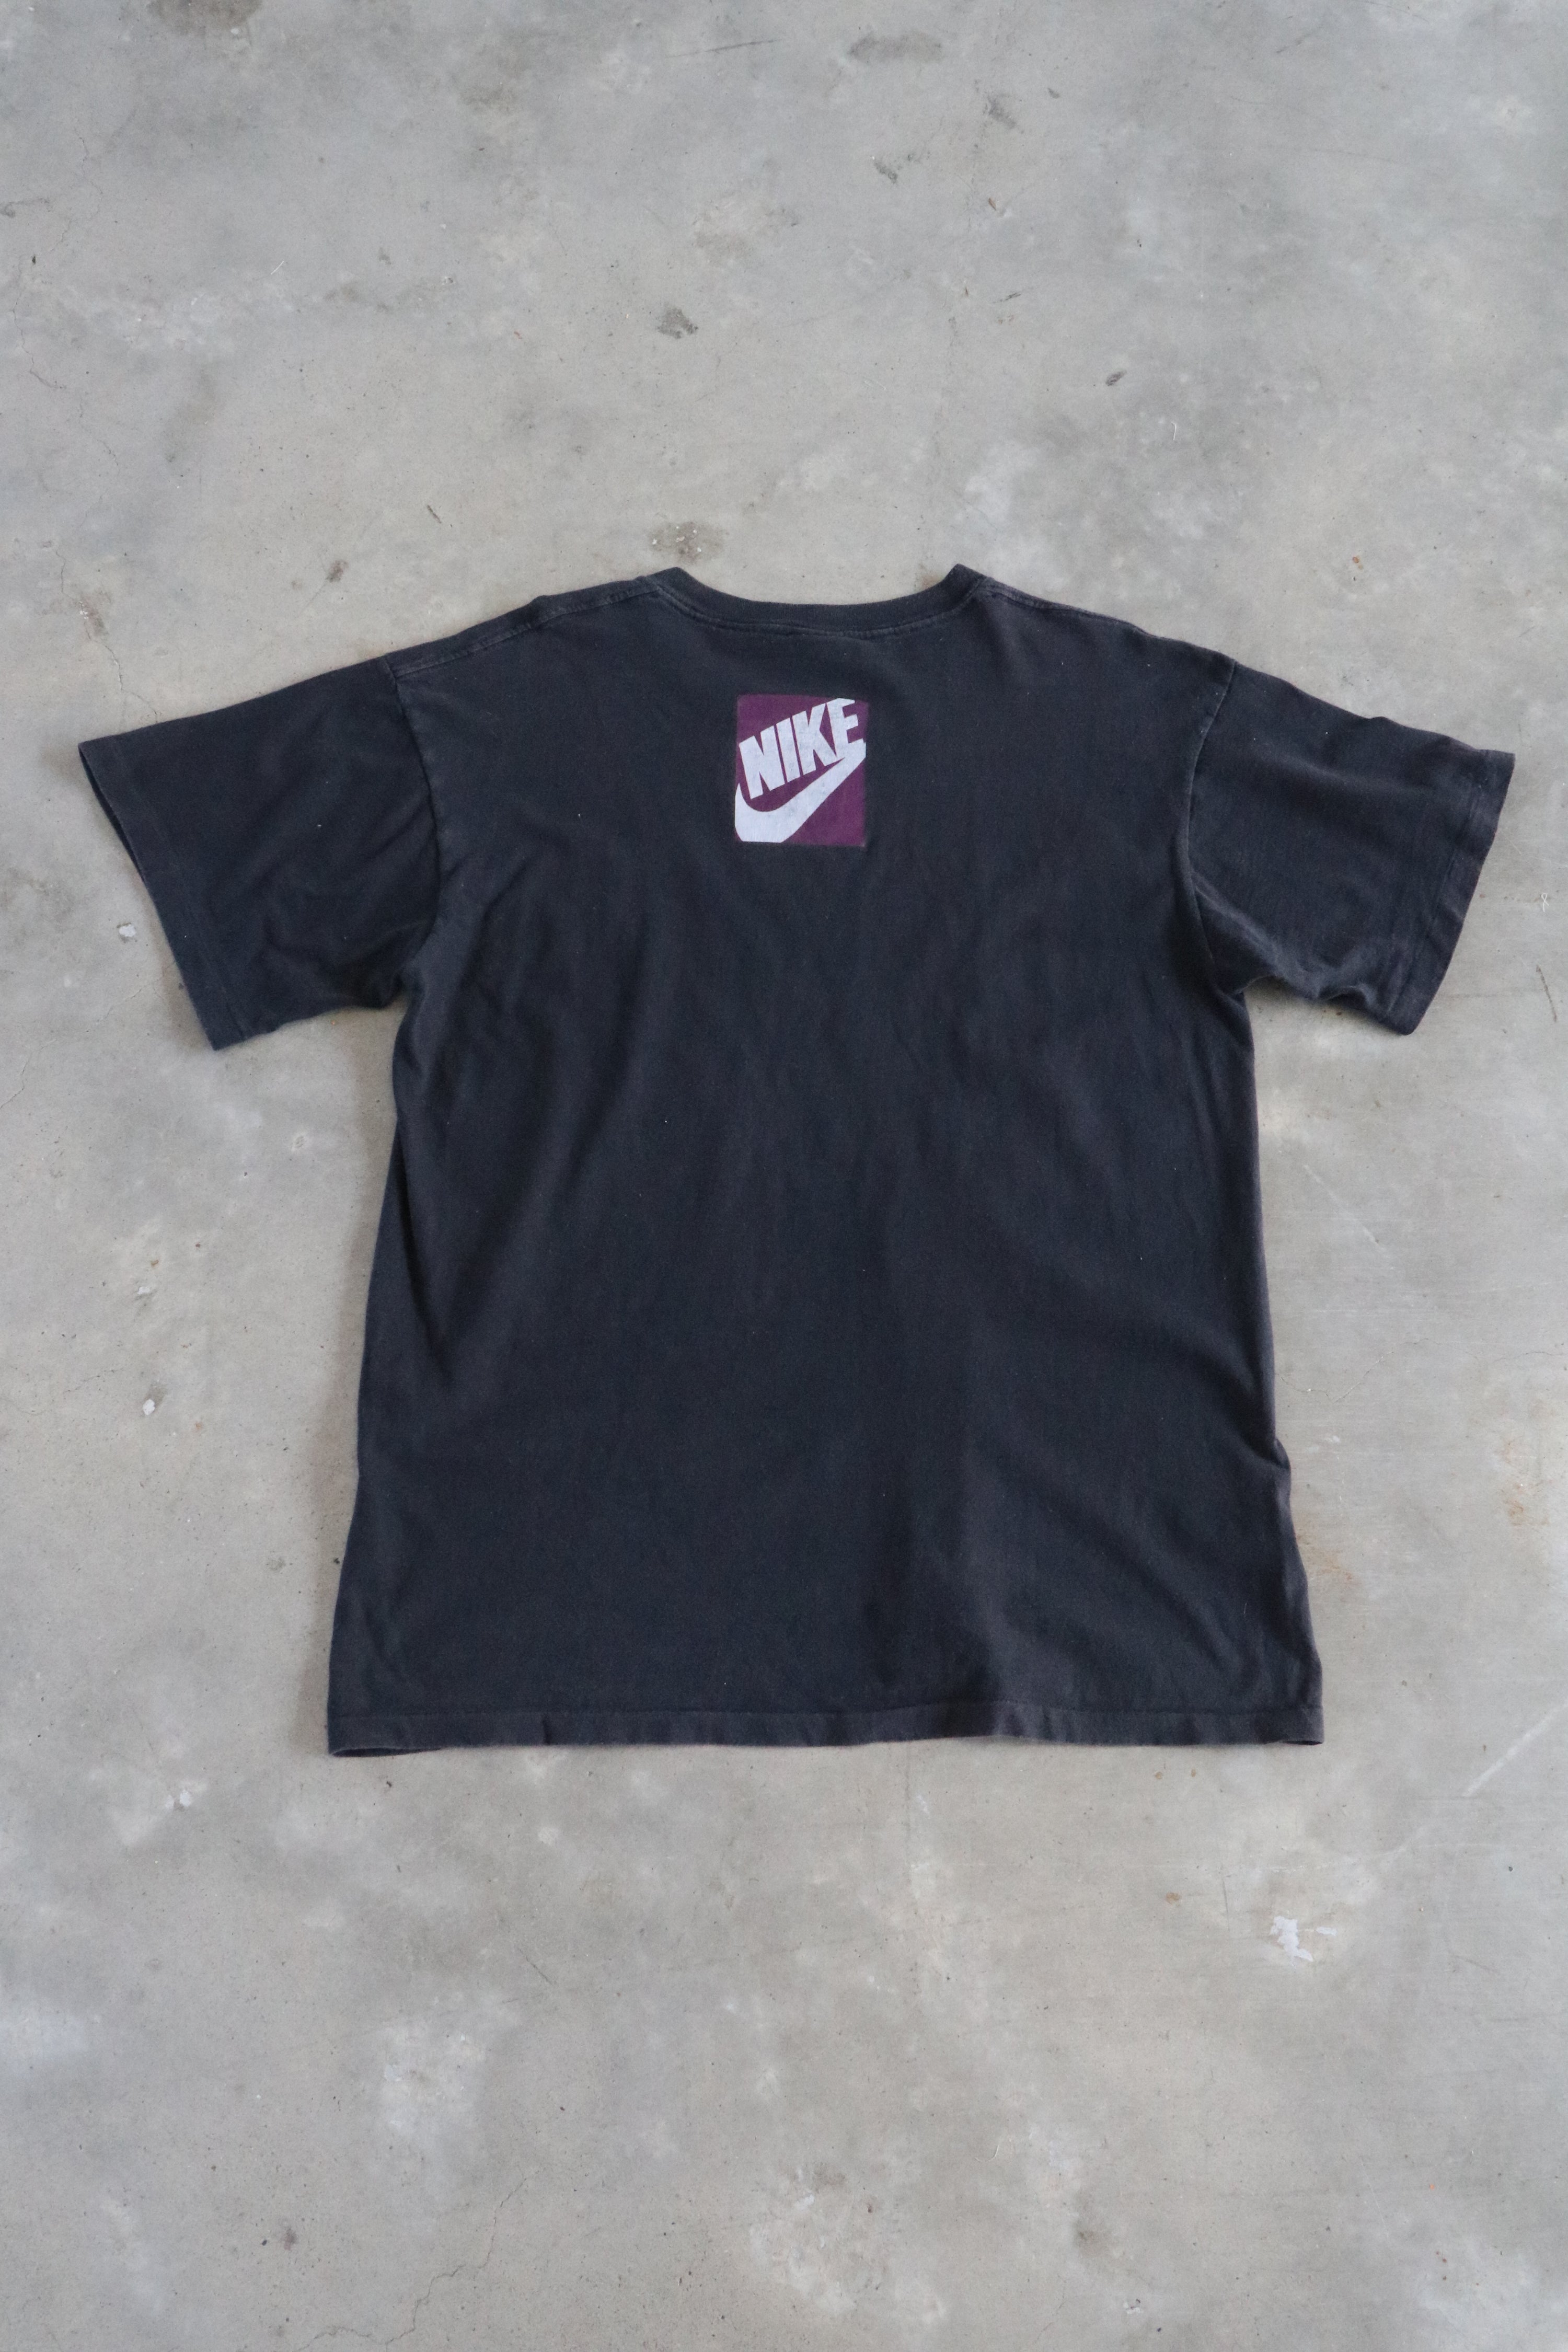 *RARE* Vintage 90's Nike Grey Tag Andre Agassi Tee XL